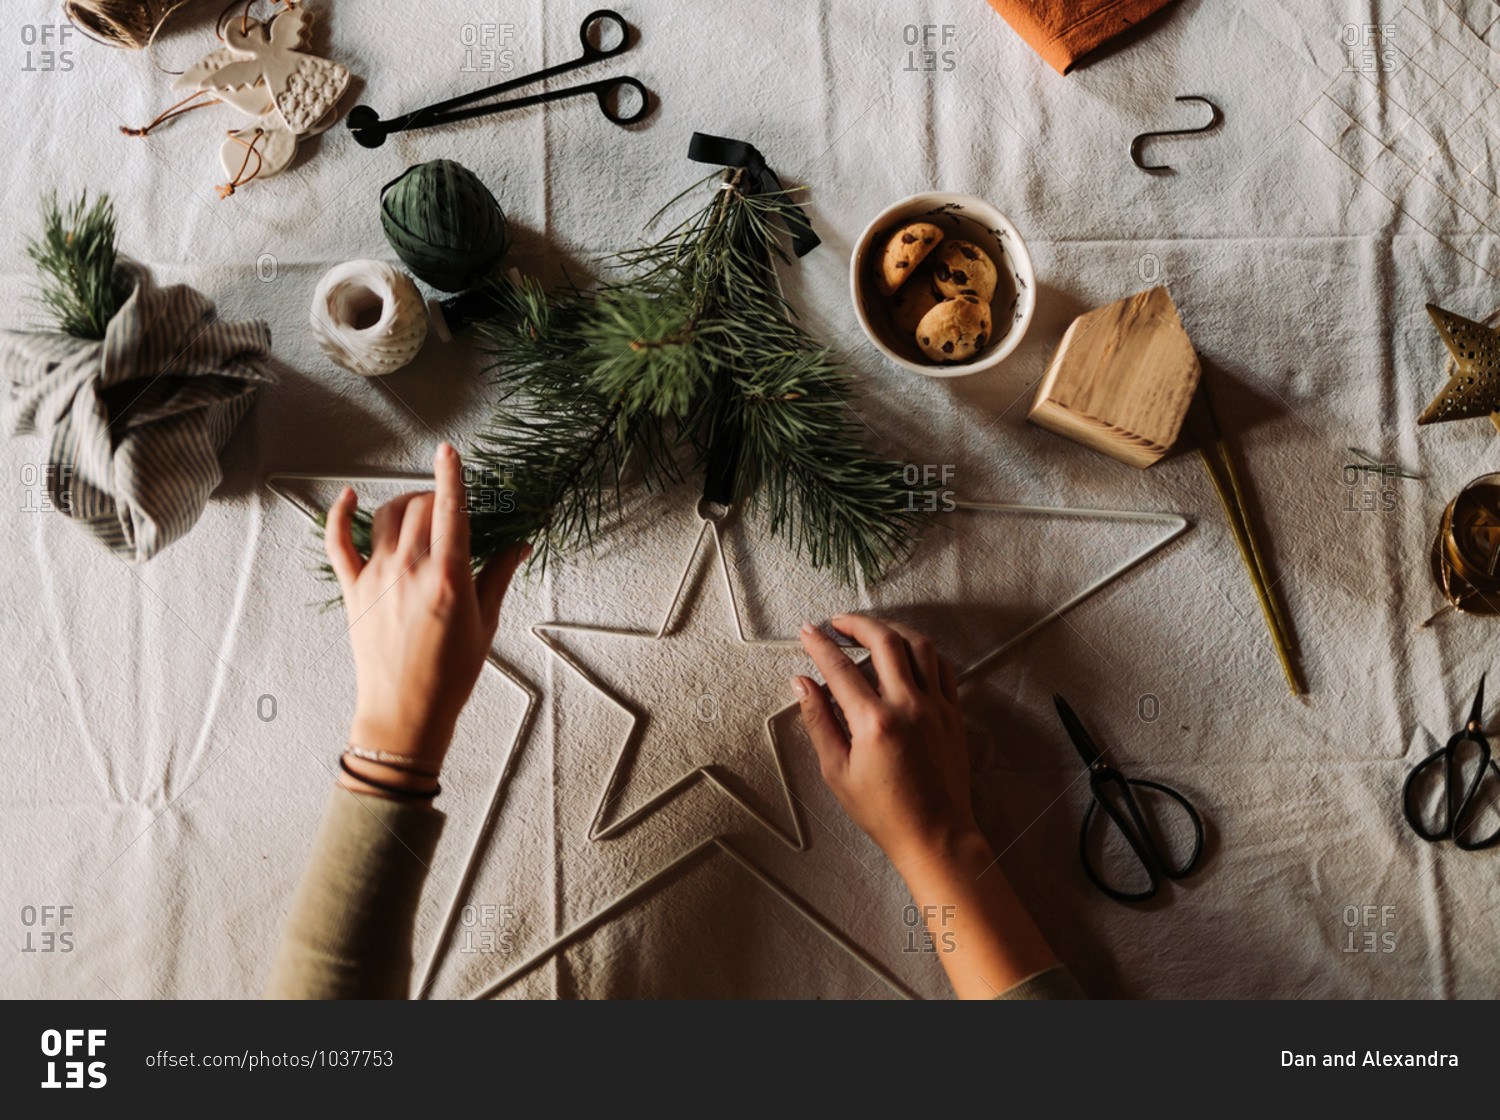 Crafter making Christmas decorations on table with linen tablecloth viewed from above